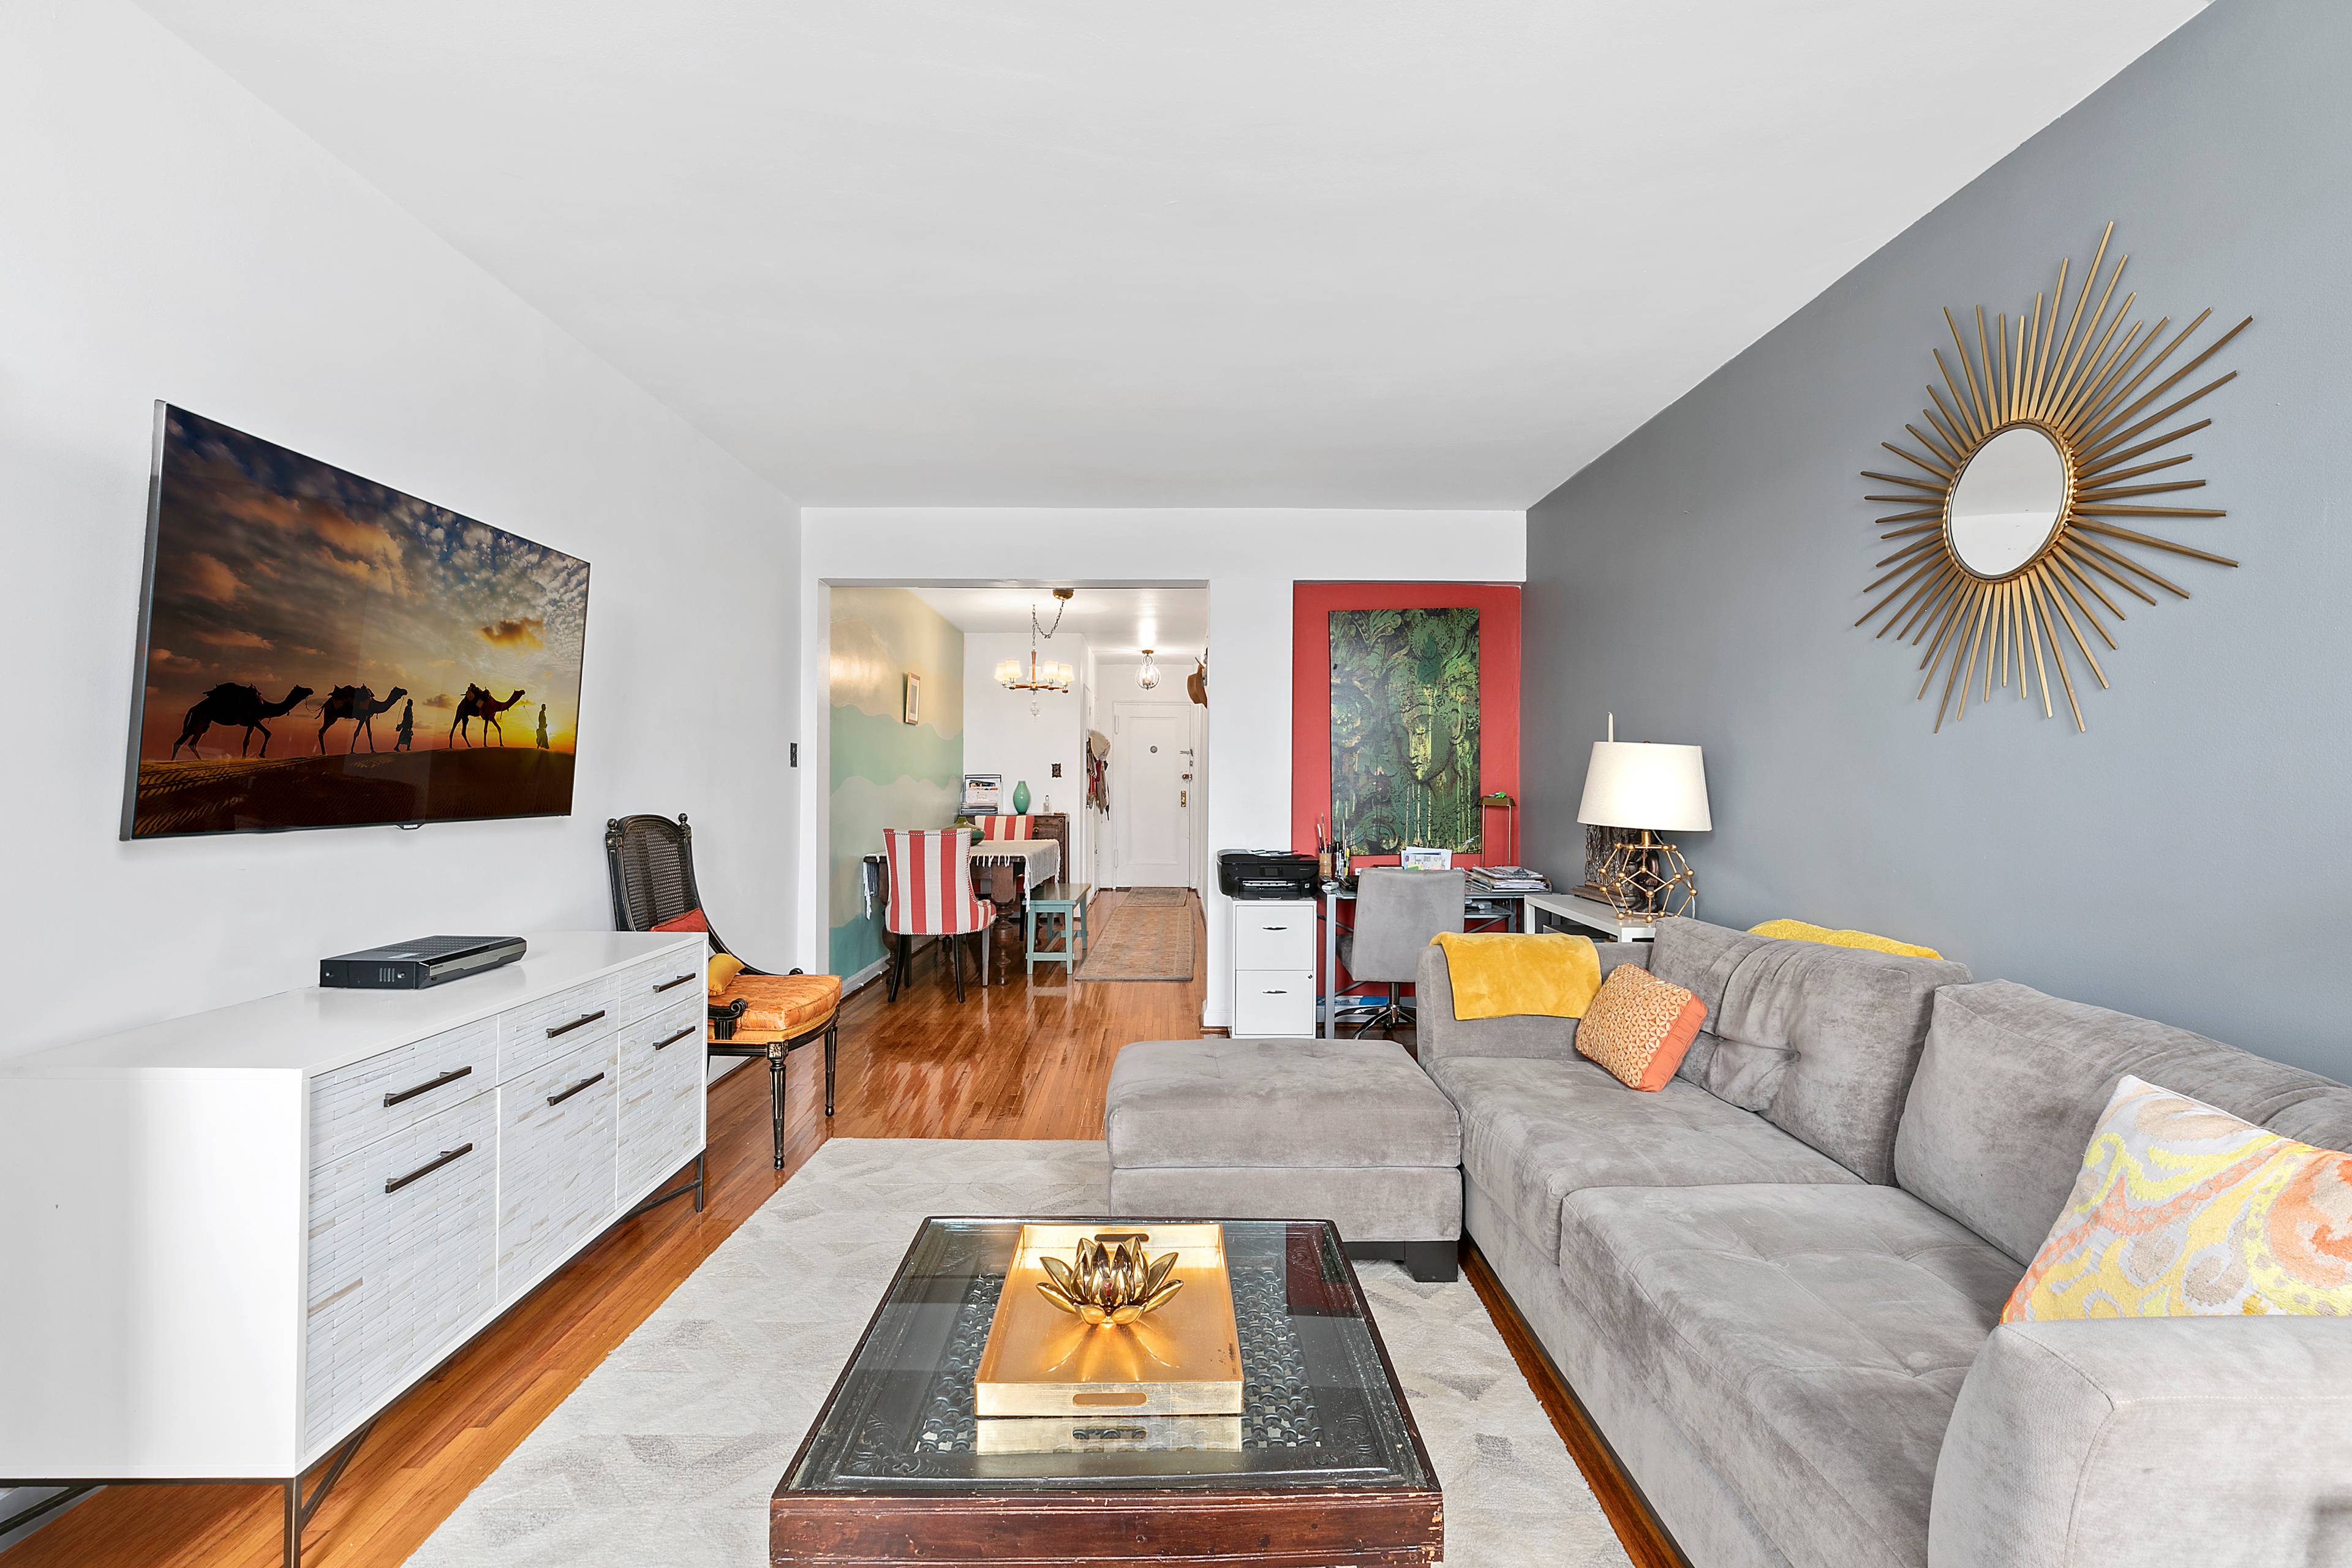 Introducing 221 Mcdonald Avenue apartment 6D ; a well maintained post war coop in the heart of Windsor Terrace.